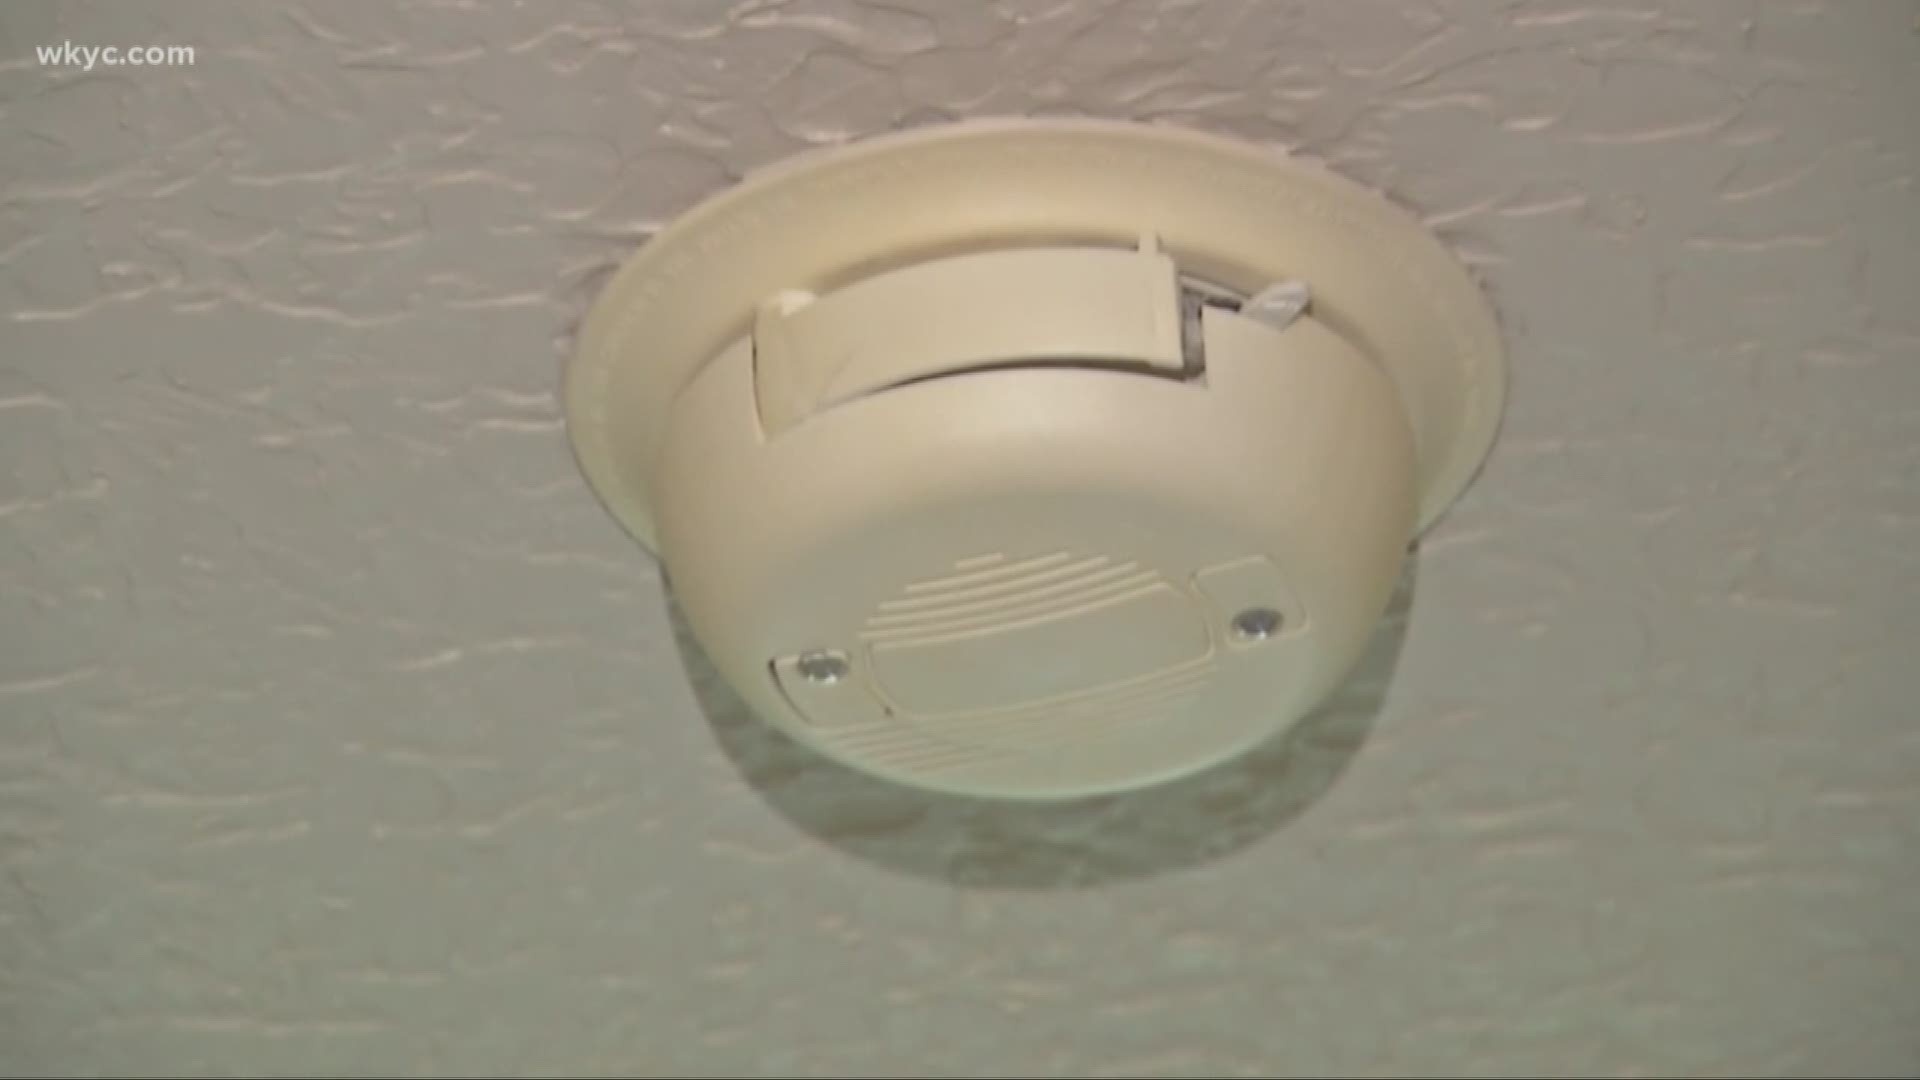 smoke detectors that use a mother's voice